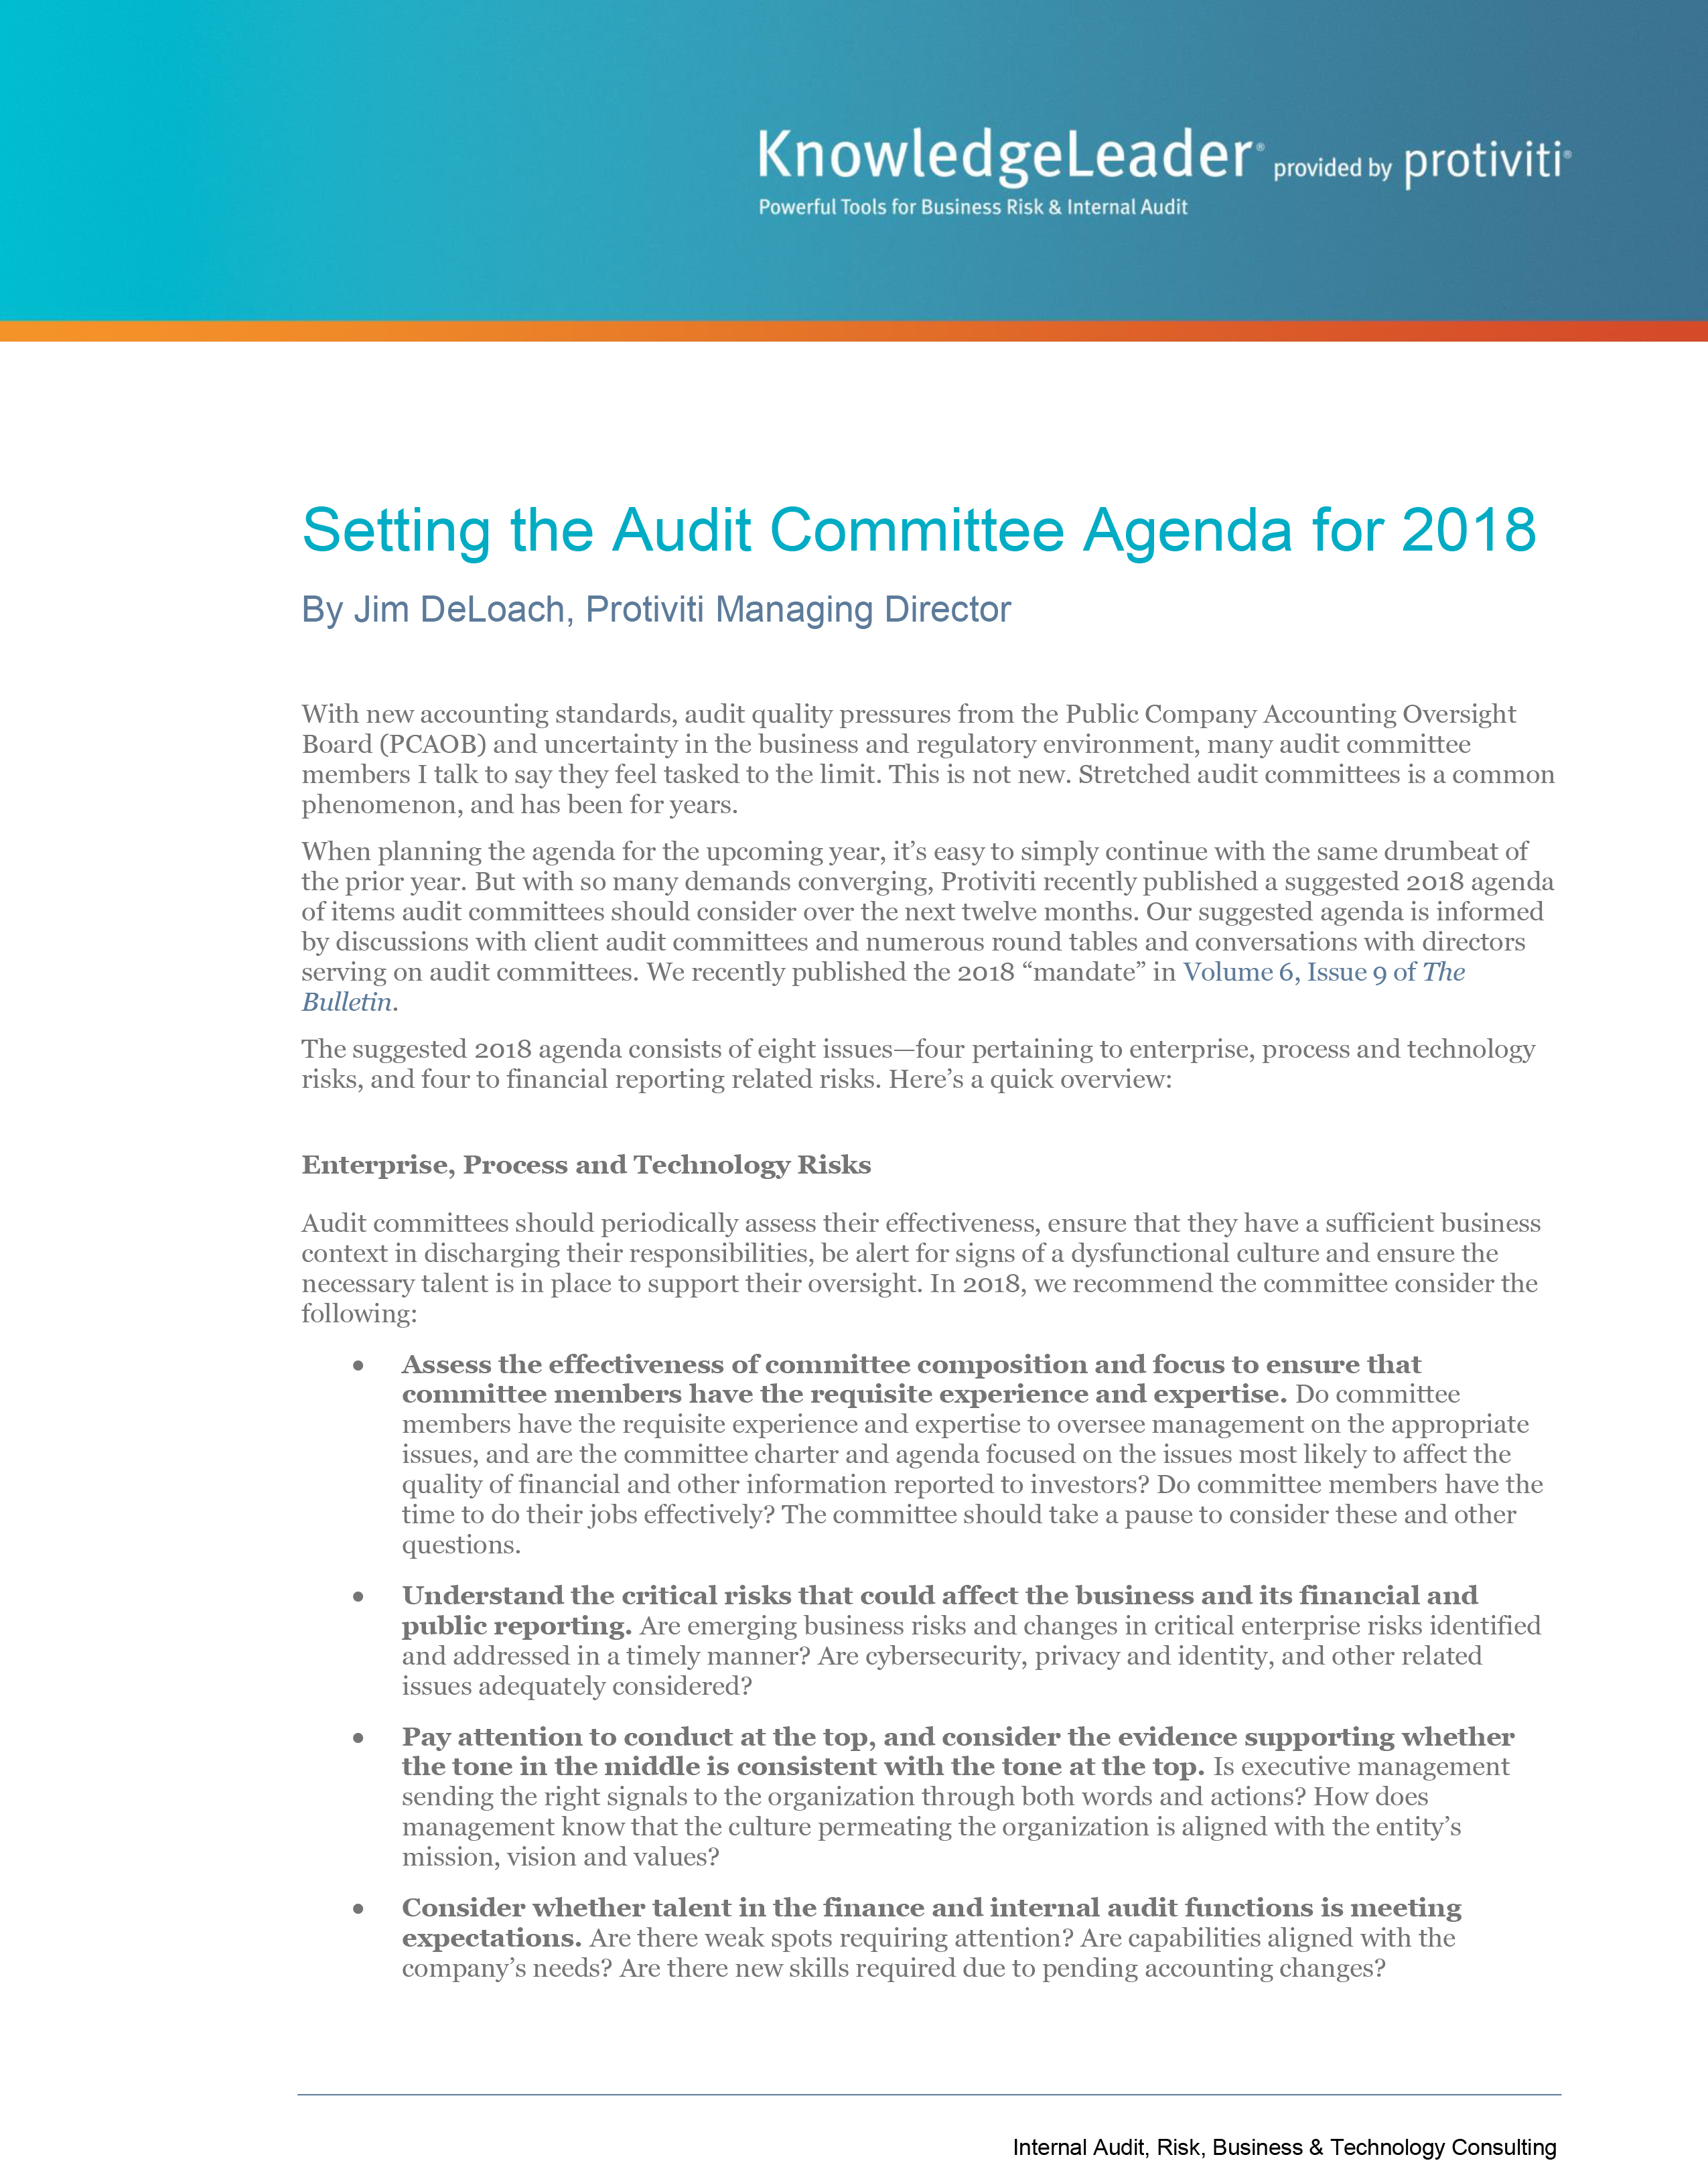 Screenshot of the first page of Setting the Audit Committee Agenda for 2018